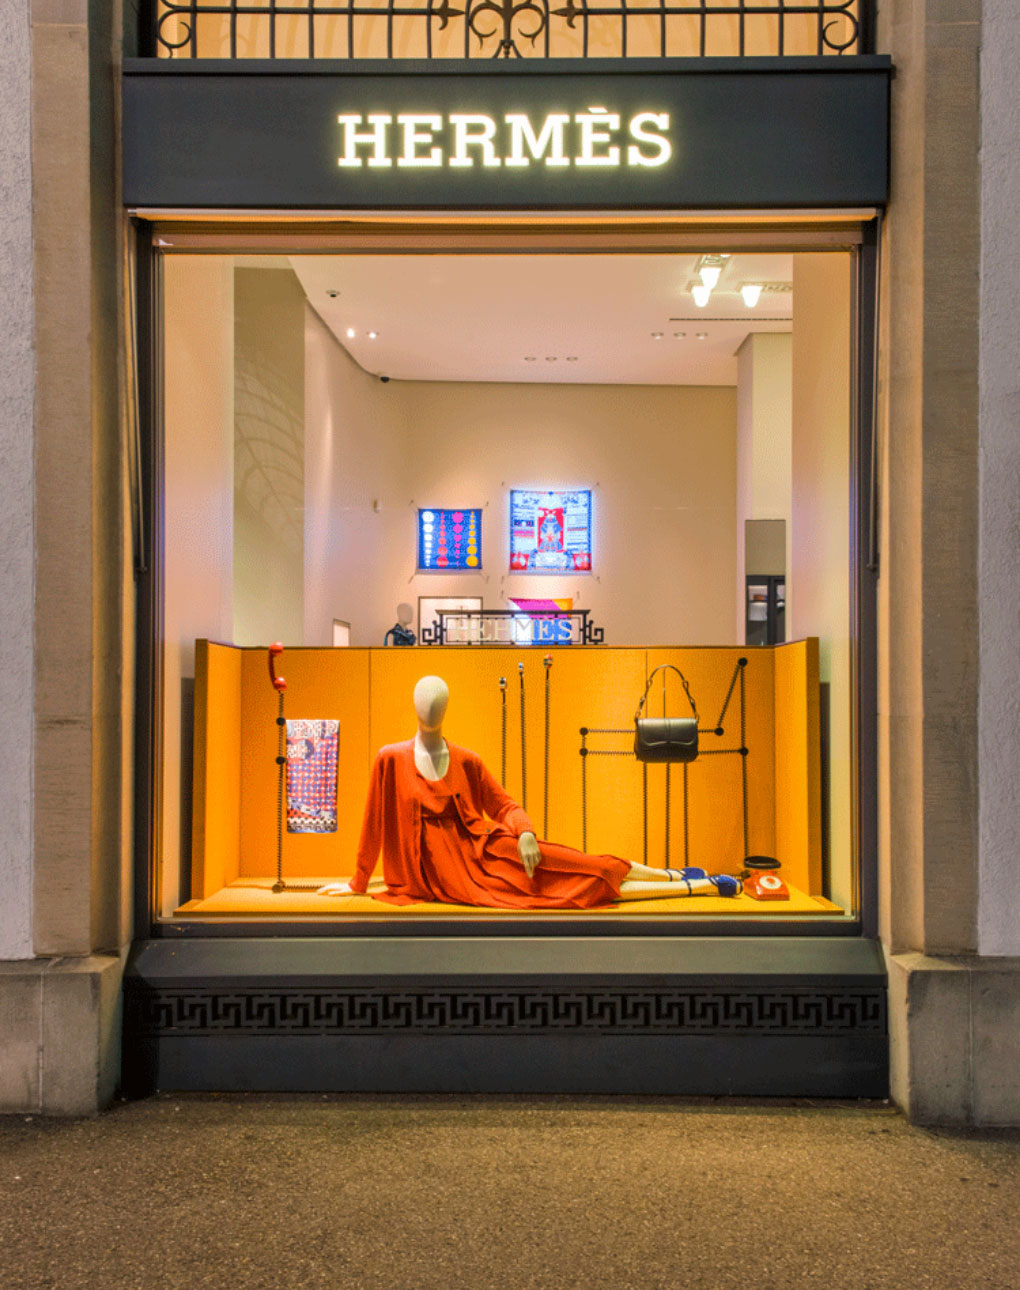 Hermès - Connected Objects